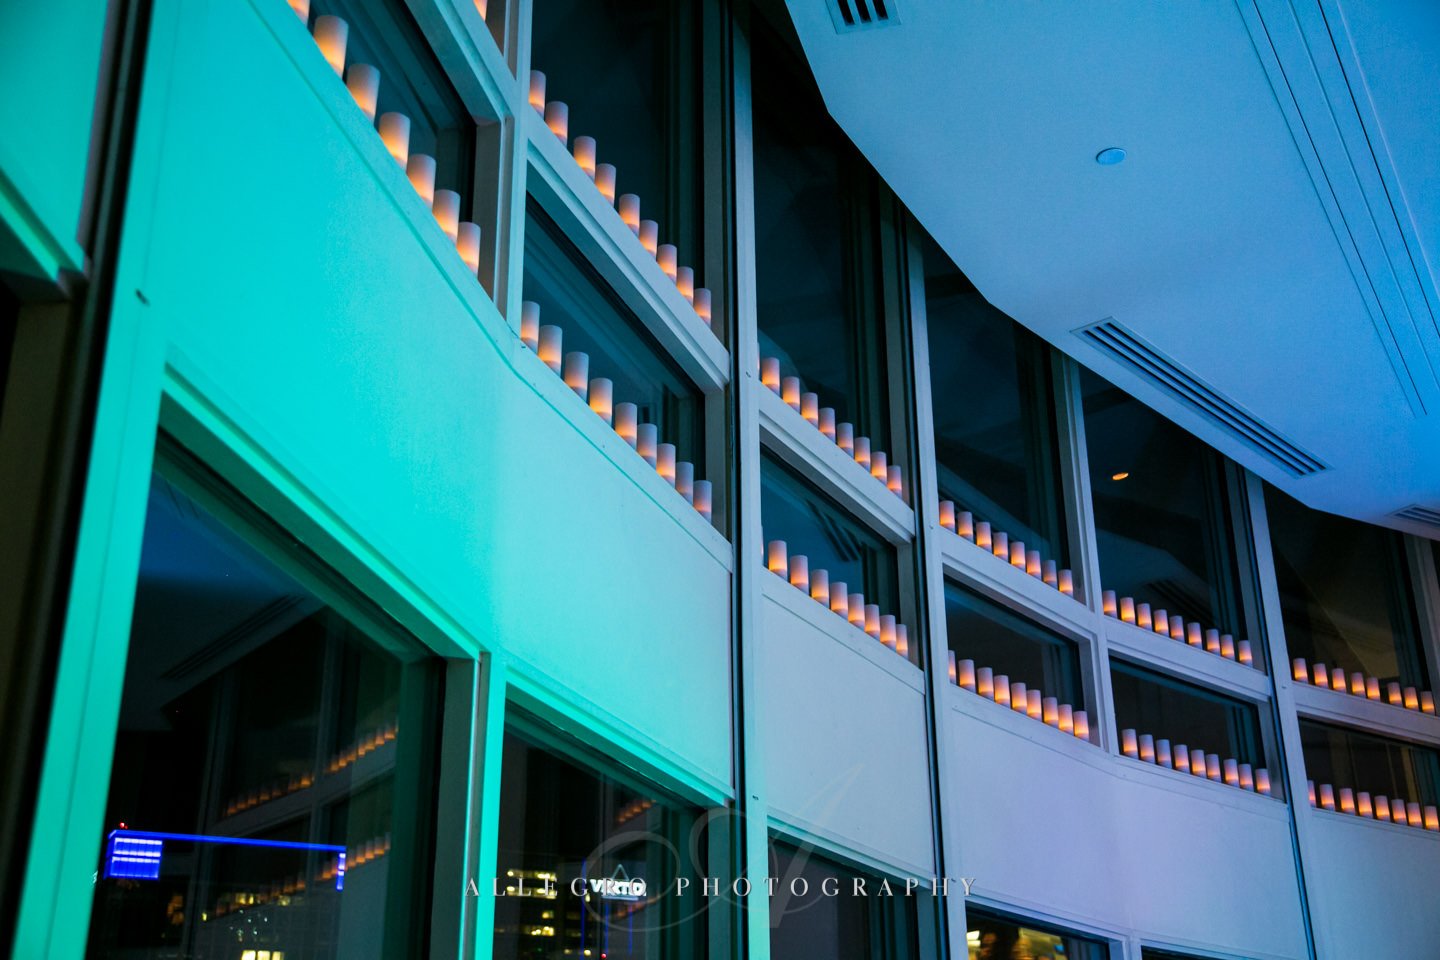 candles along the windows and cool uplights at boston harbor hotel - photo by allegro photography